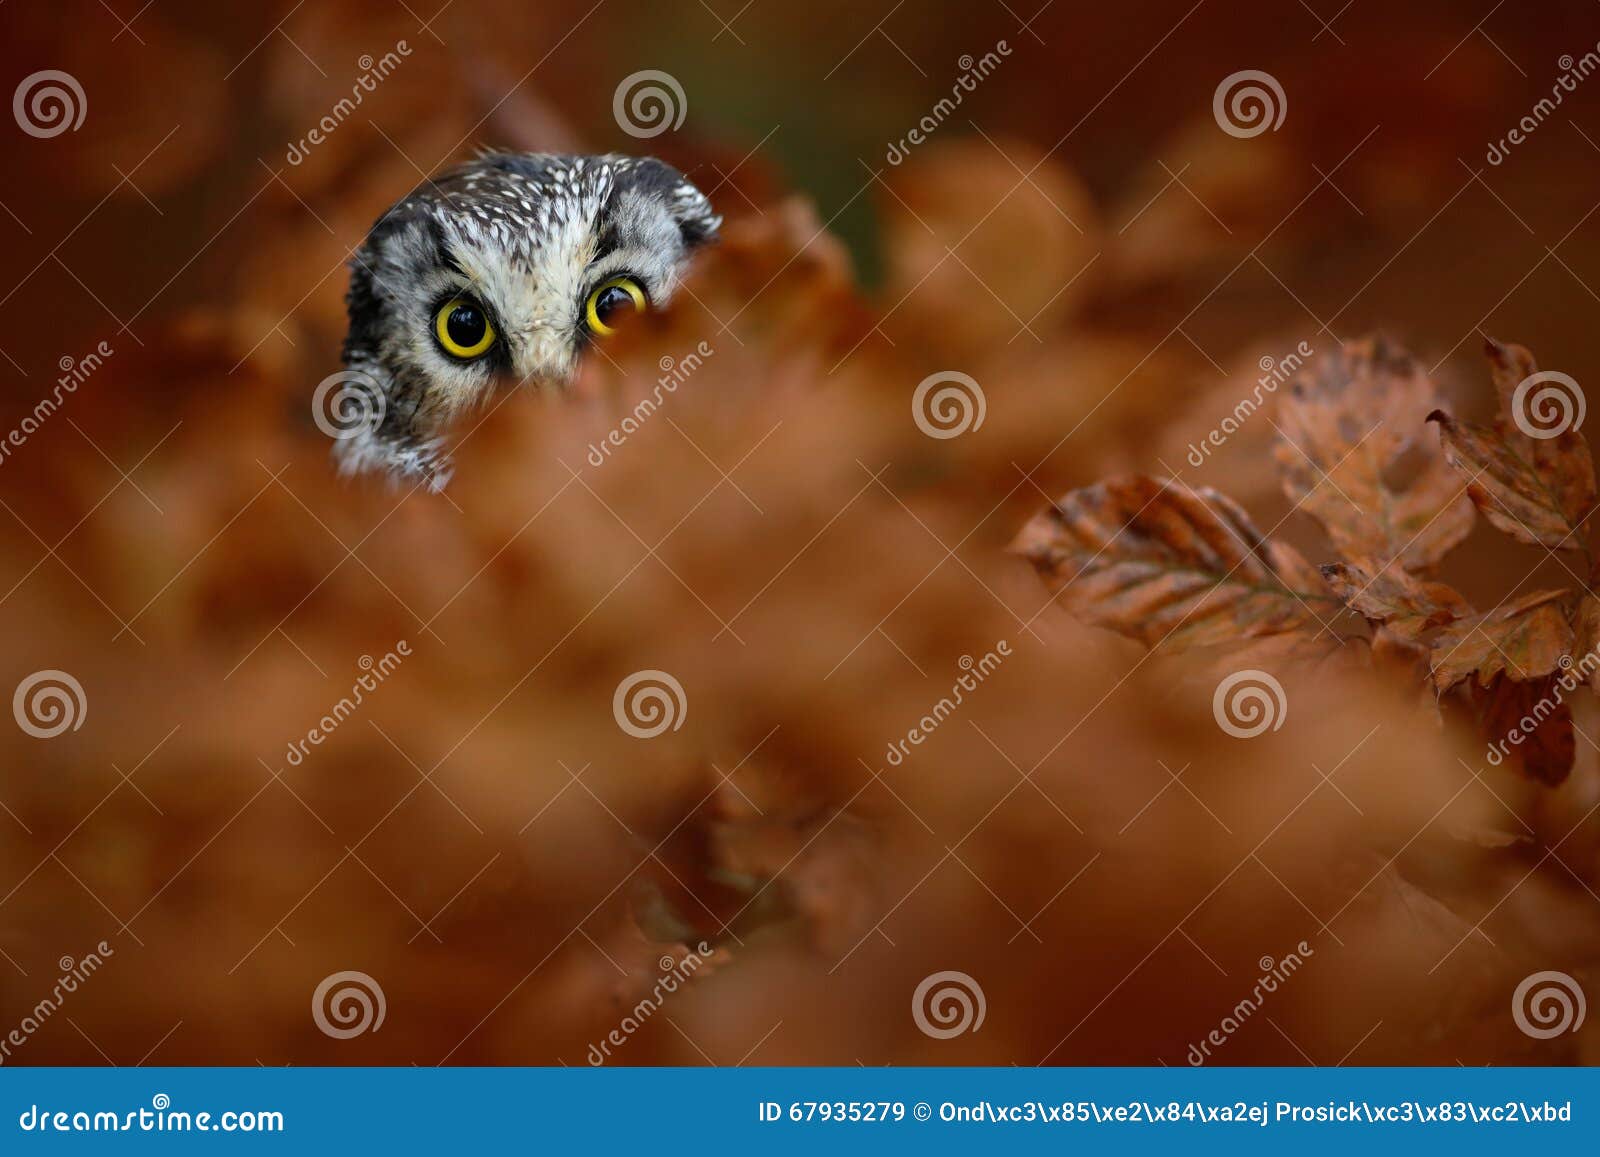 portrait of boreal owl with yellow eyes in orange oak tree during autumn